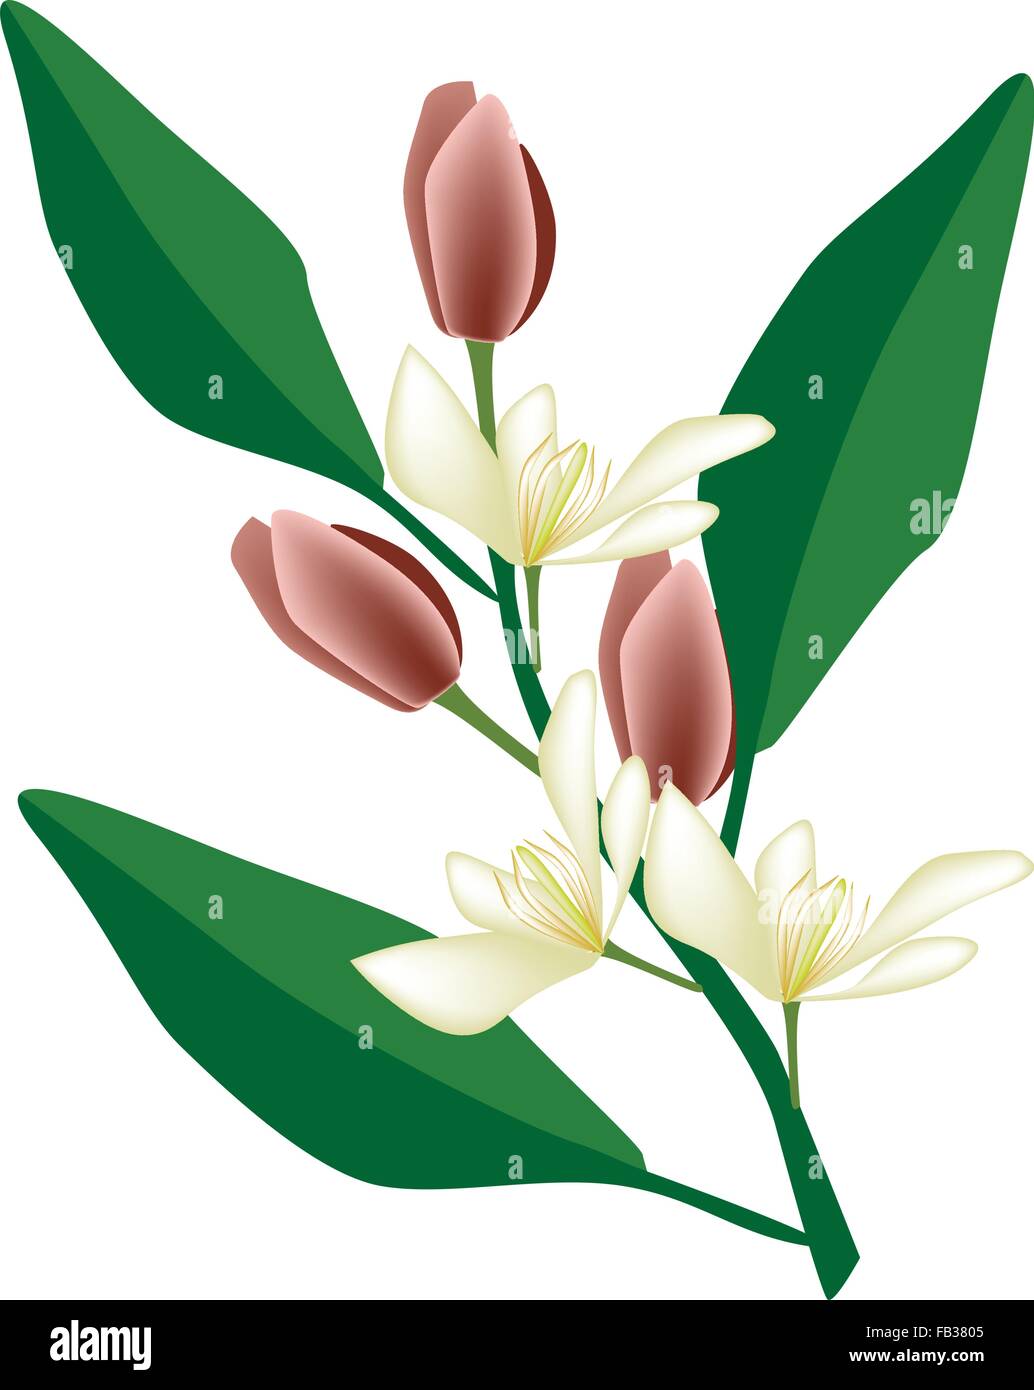 Beautiful Flower, Illustration of Wine Magnolia Flower or Magnolia Figo Flower with Green Leaves on A Branch. Stock Vector